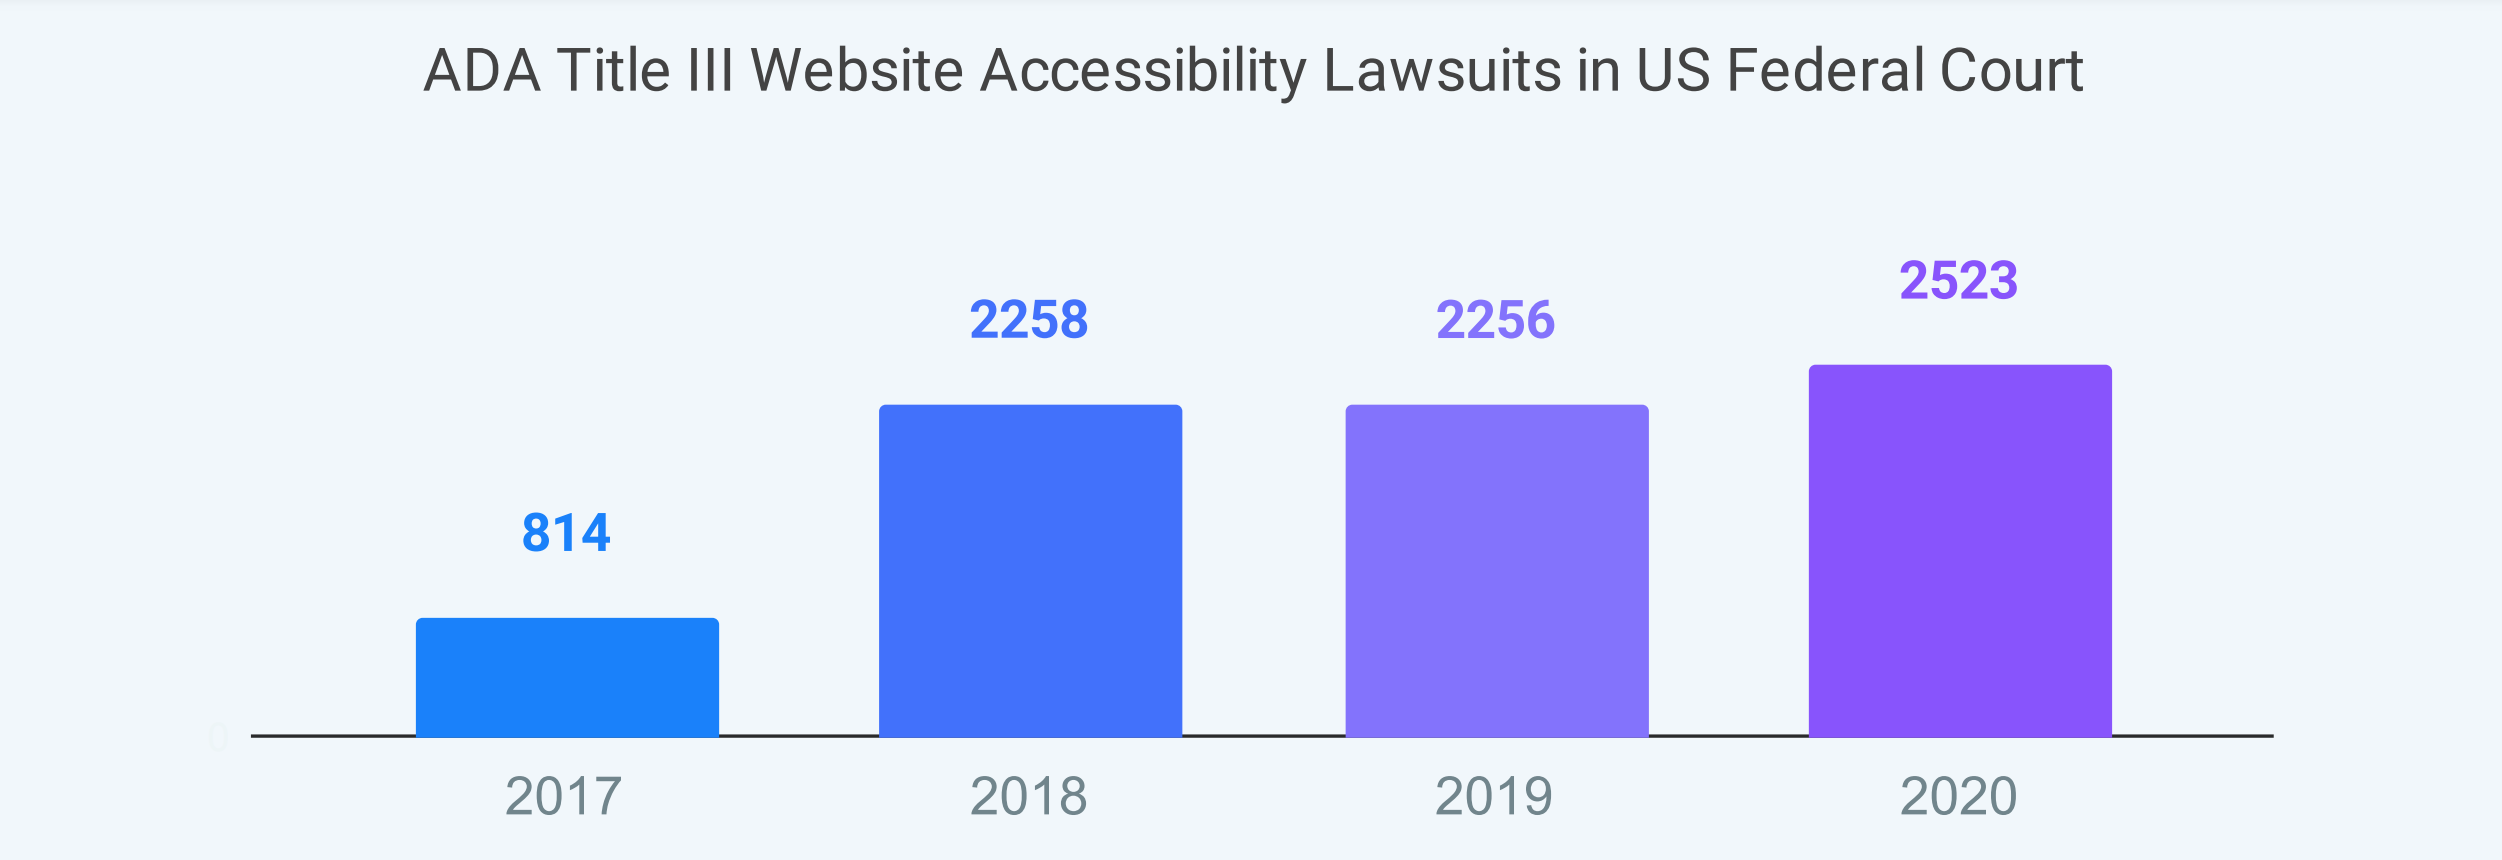 ADA Title III Website Accessibility Lawsuits in US Federal Court: 814 in 2017, 2258 in 2018, 2256 in 2019 and 2523 in 2020.